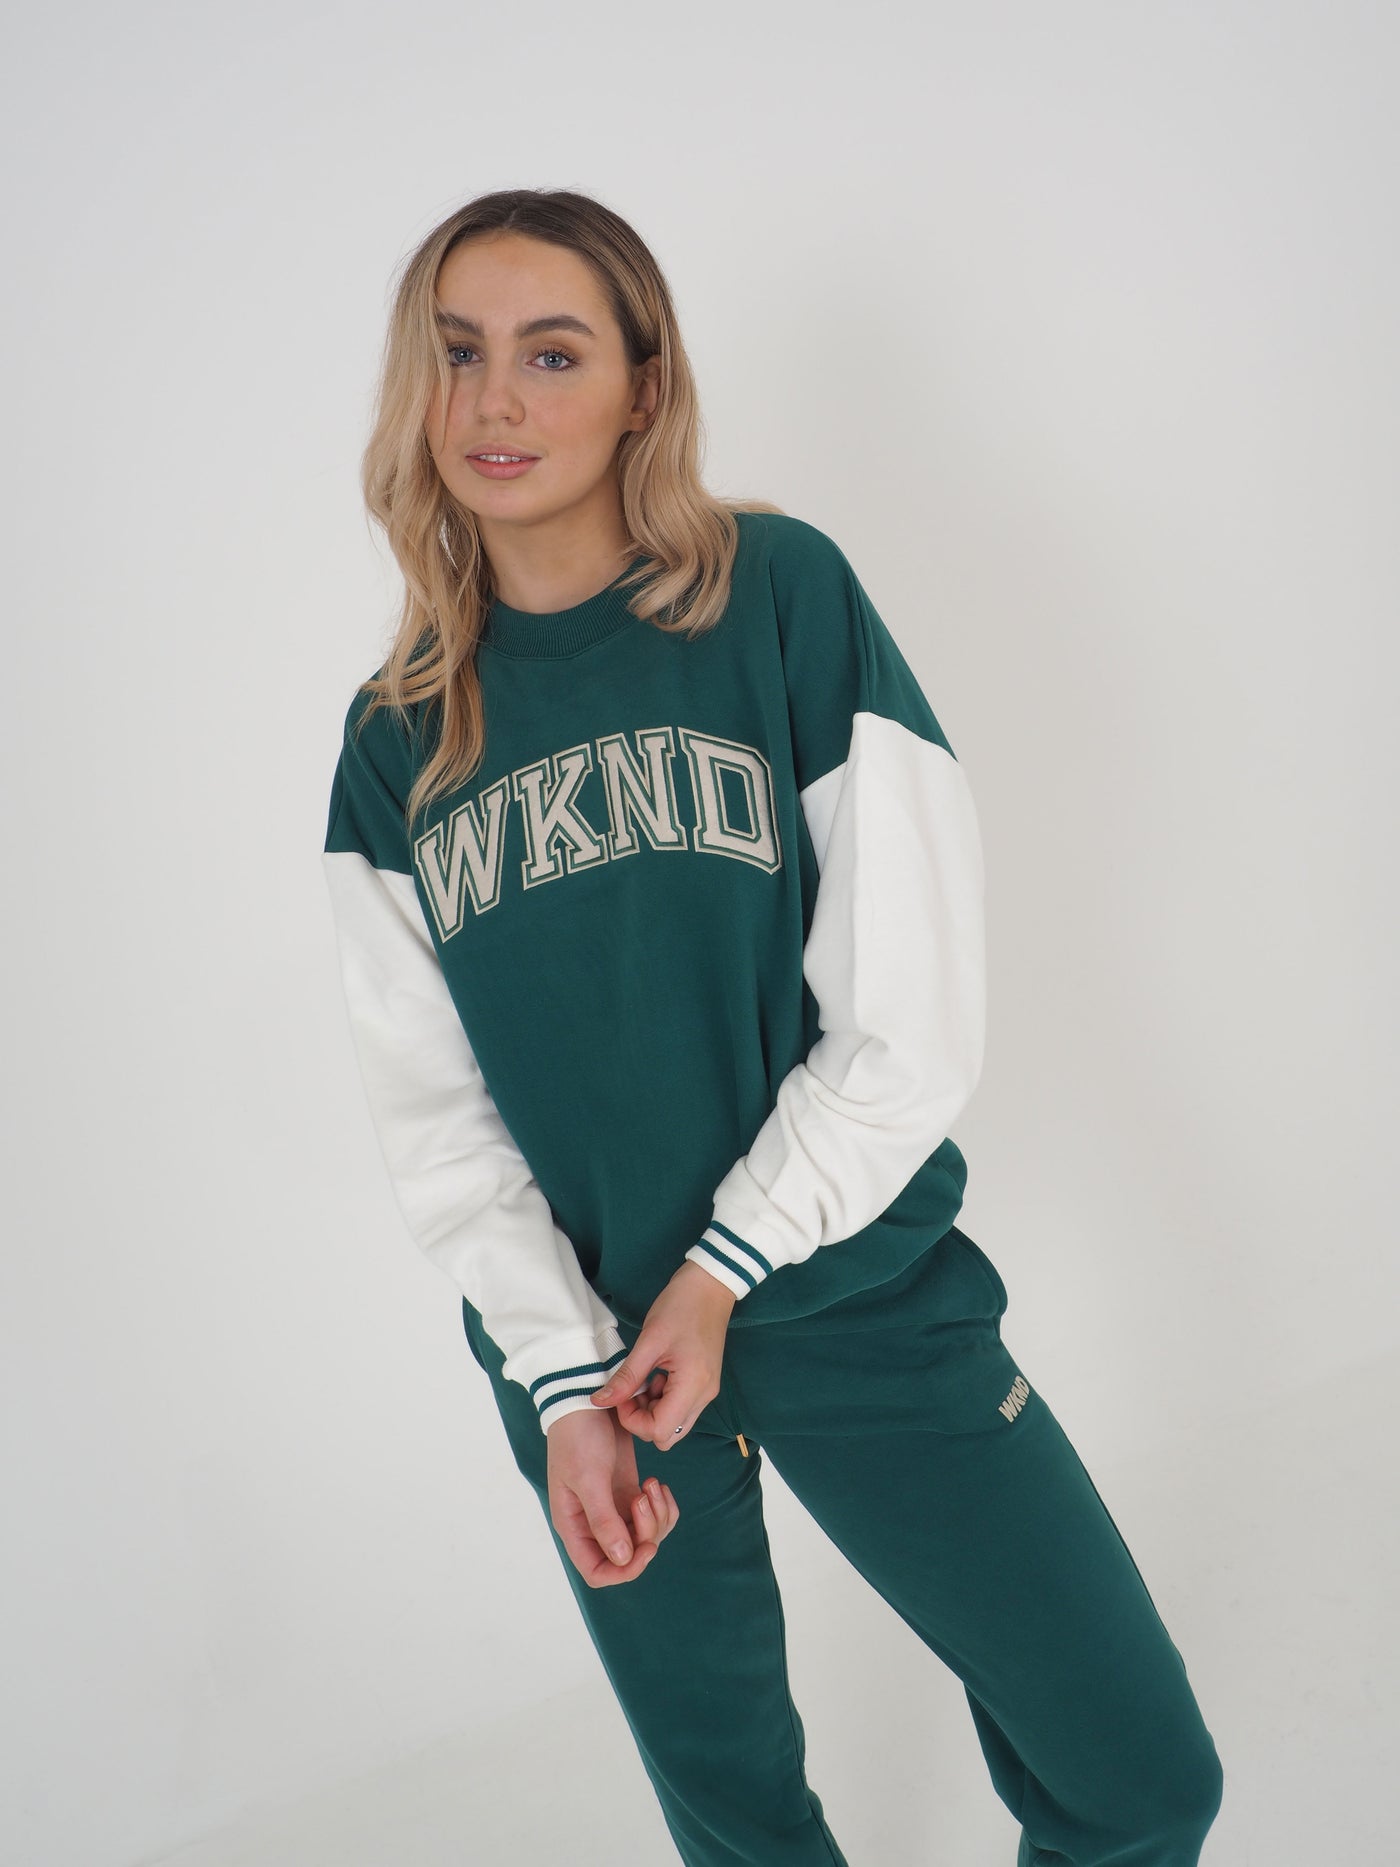 Model with blonde hair wearing a green college varsity style sweatshirt and matching joggers.  Sweatshirt has contrast white sleeves and the text reads WKND.